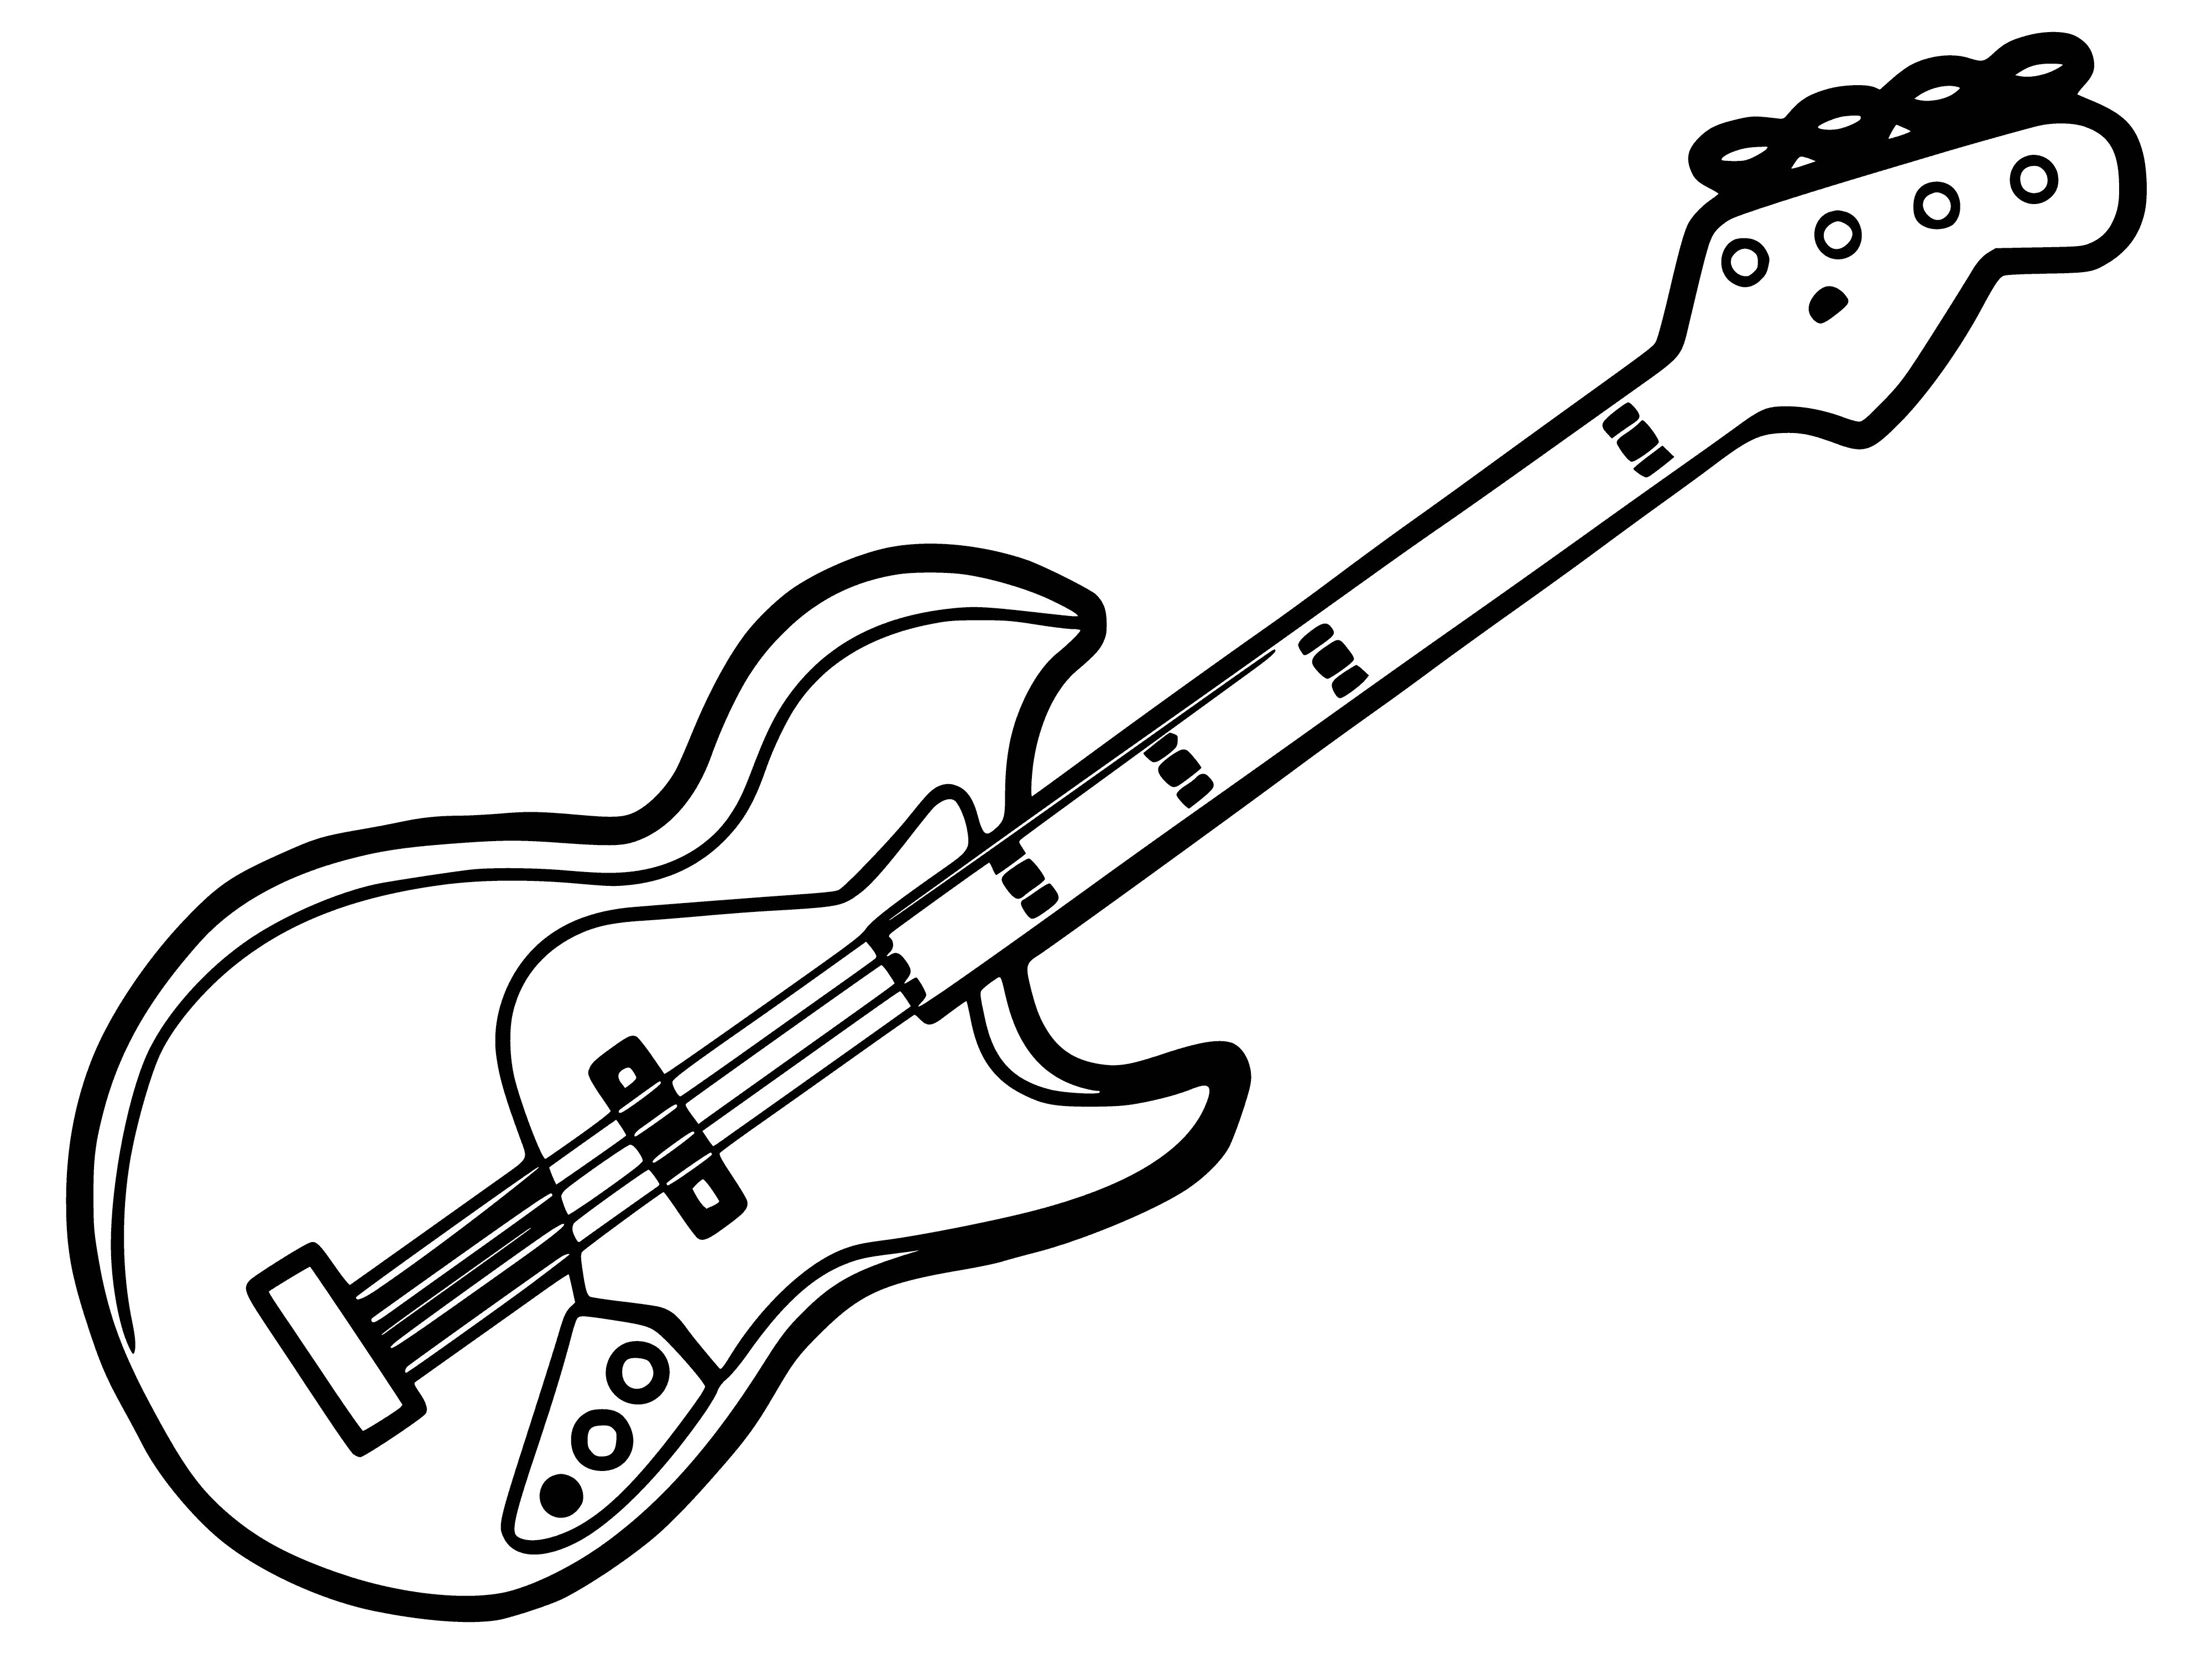 Electric guitar coloring page